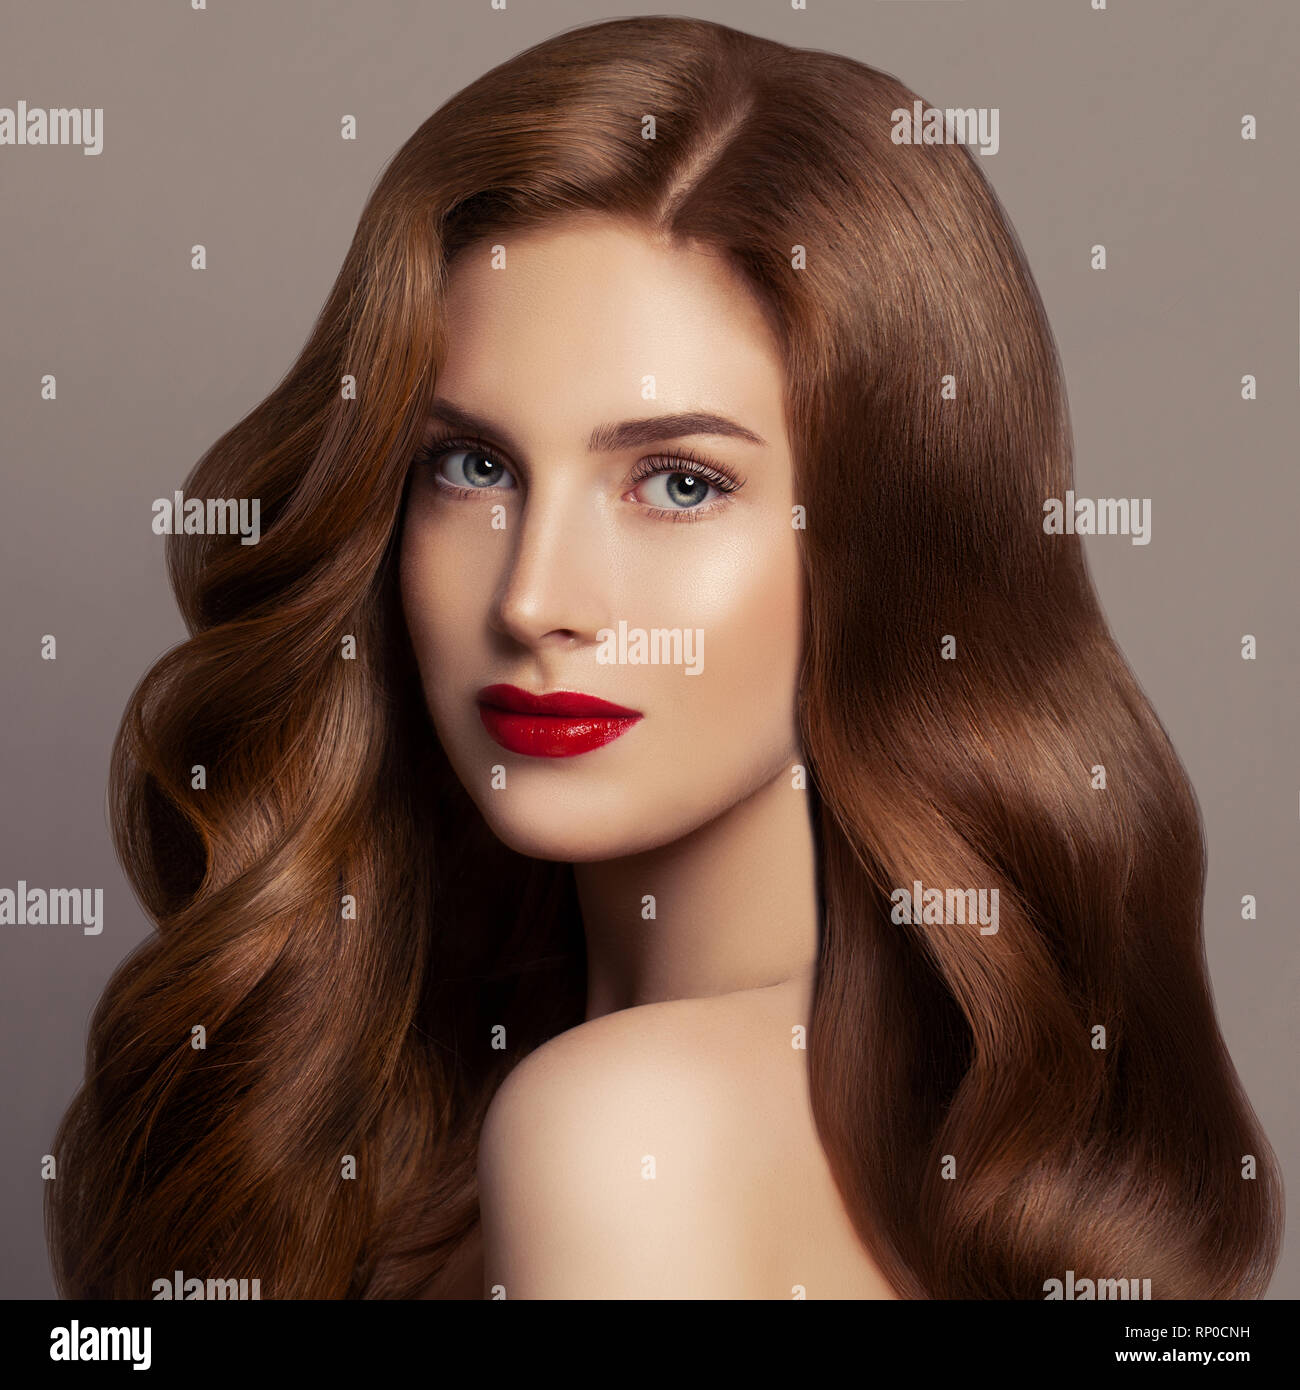 Beautiful hair woman. Female model girl with long red curly hair. Redhead woman portrait Stock Photo